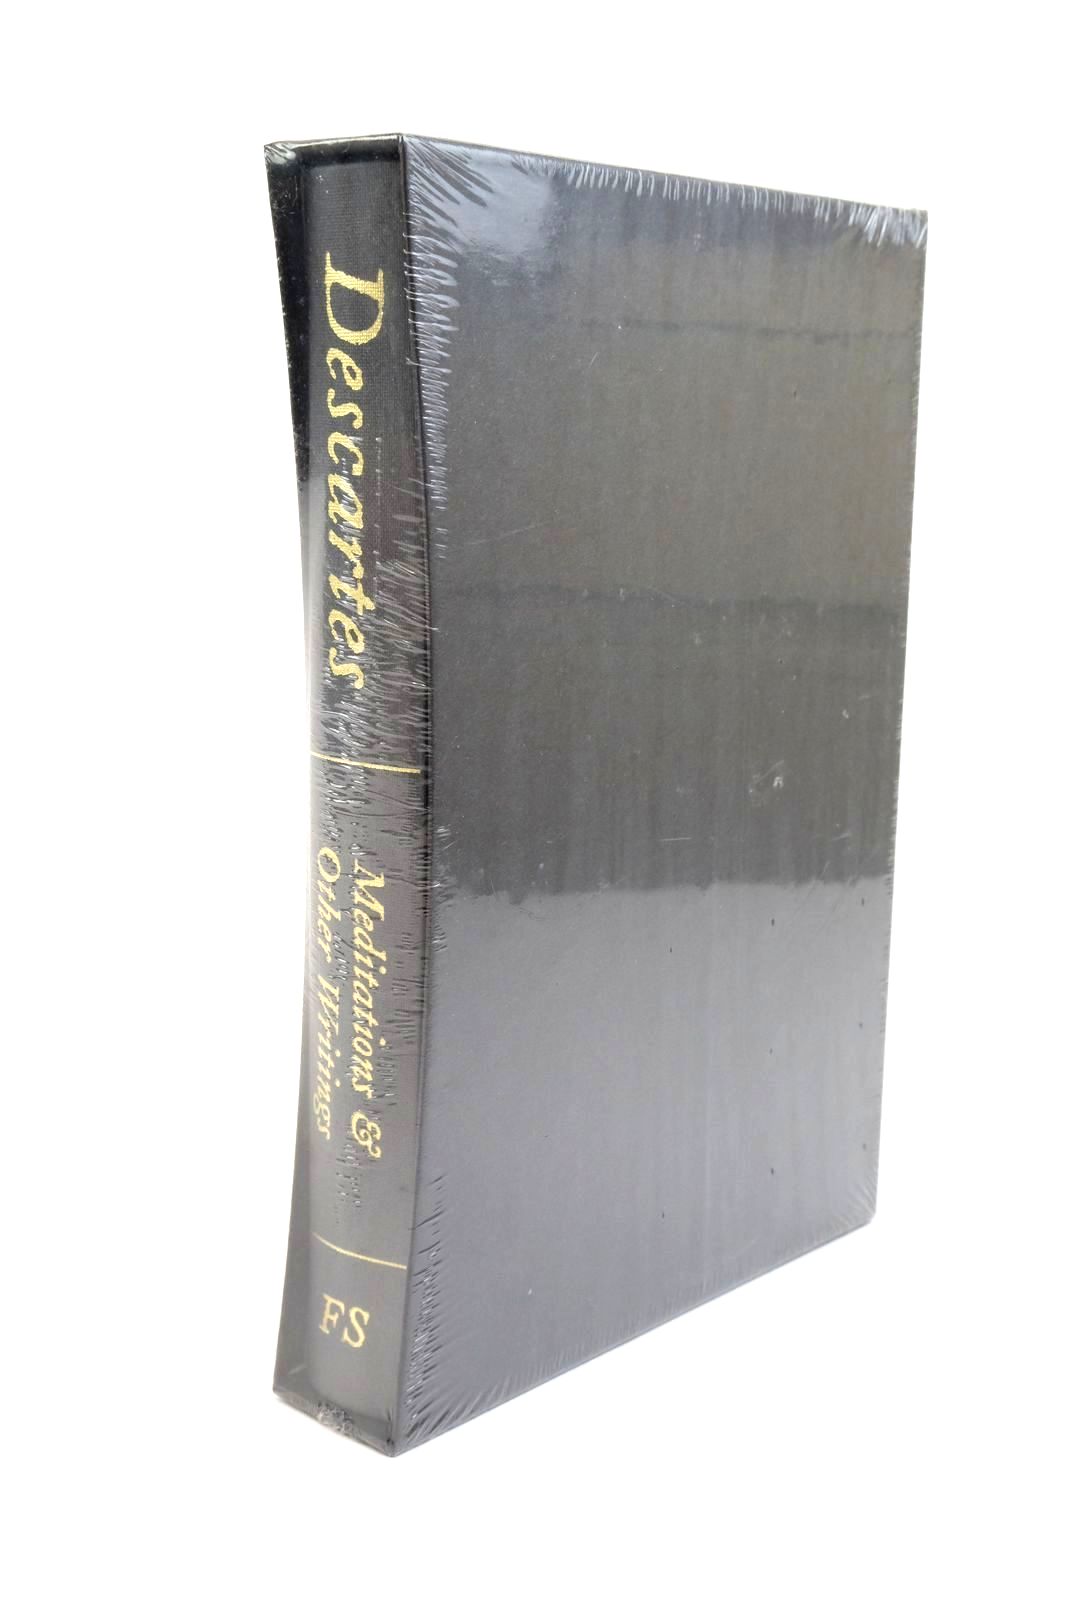 Photo of MEDITATIONS AND OTHER WRITINGS written by Descartes, Rene illustrated by Shout, published by Folio Society (STOCK CODE: 1322328)  for sale by Stella & Rose's Books